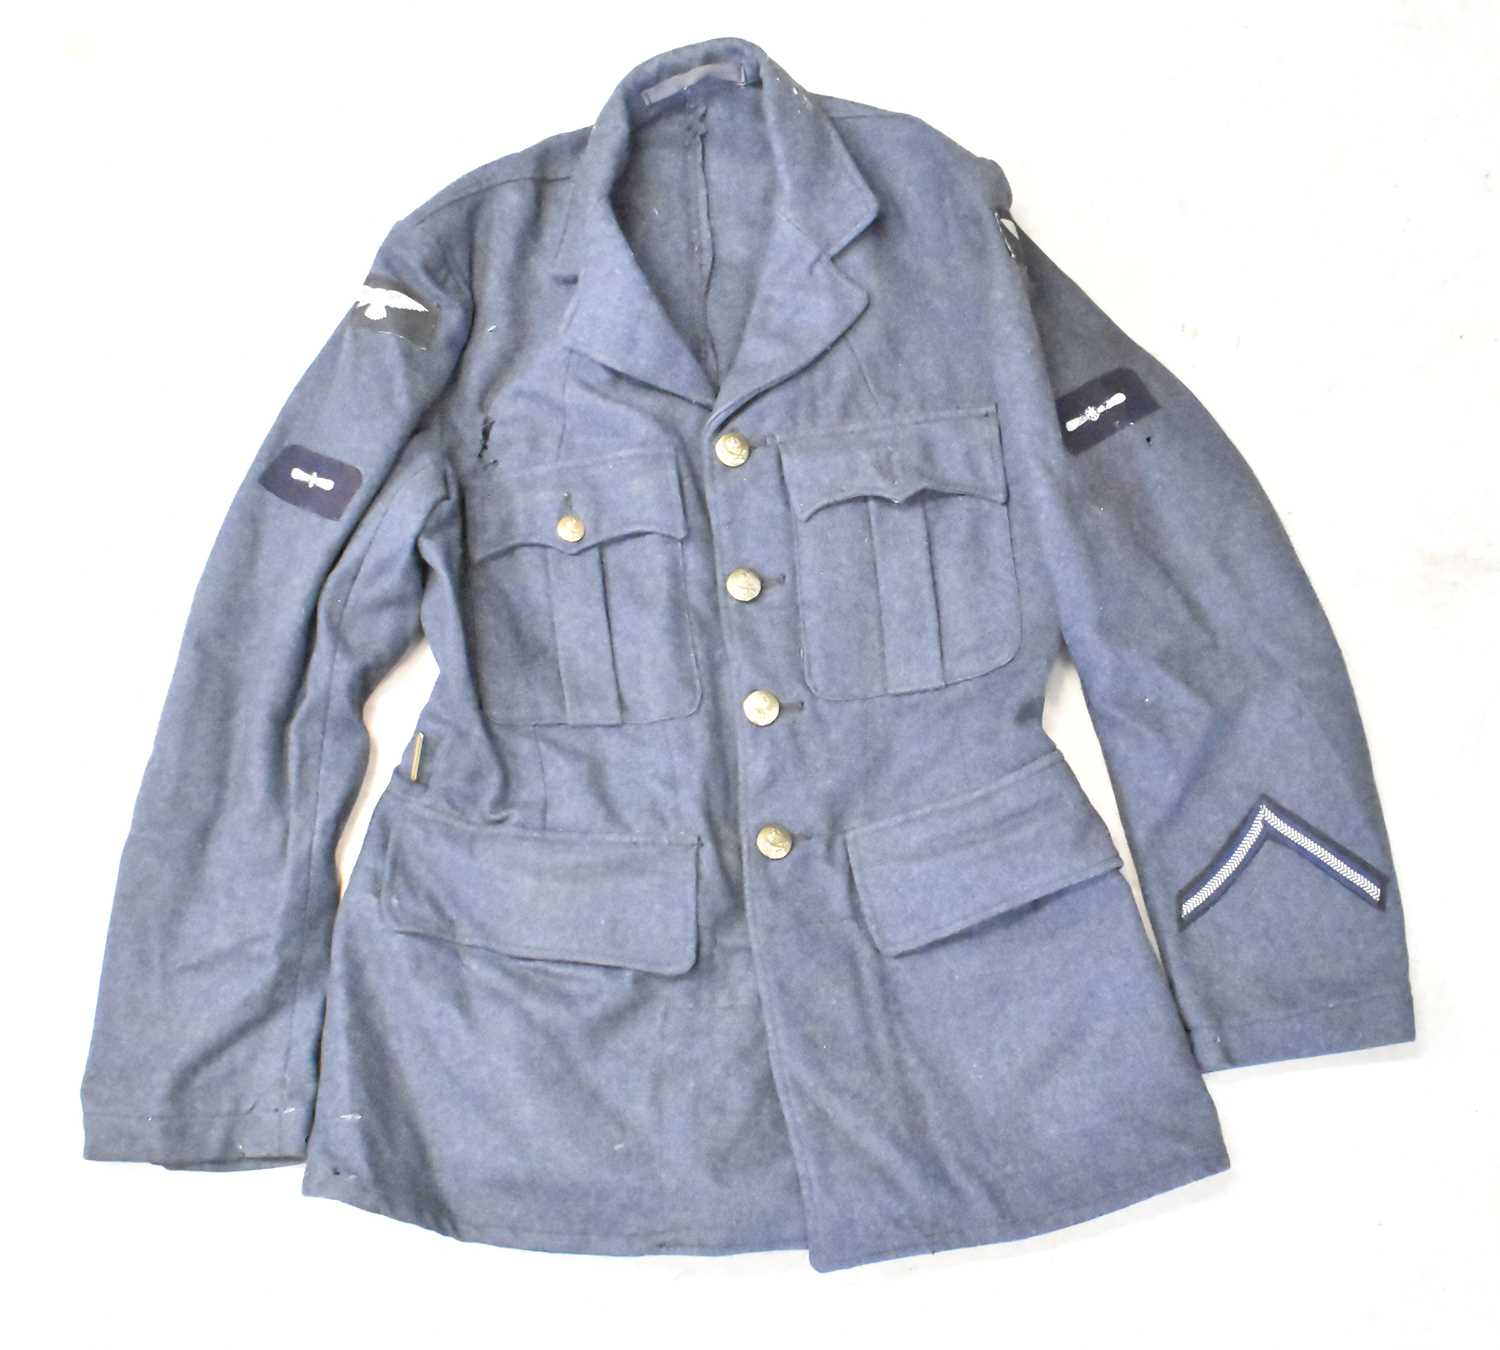 A military kit bag containing uniform and garments from the RAF and others, to include jacket, - Image 7 of 12